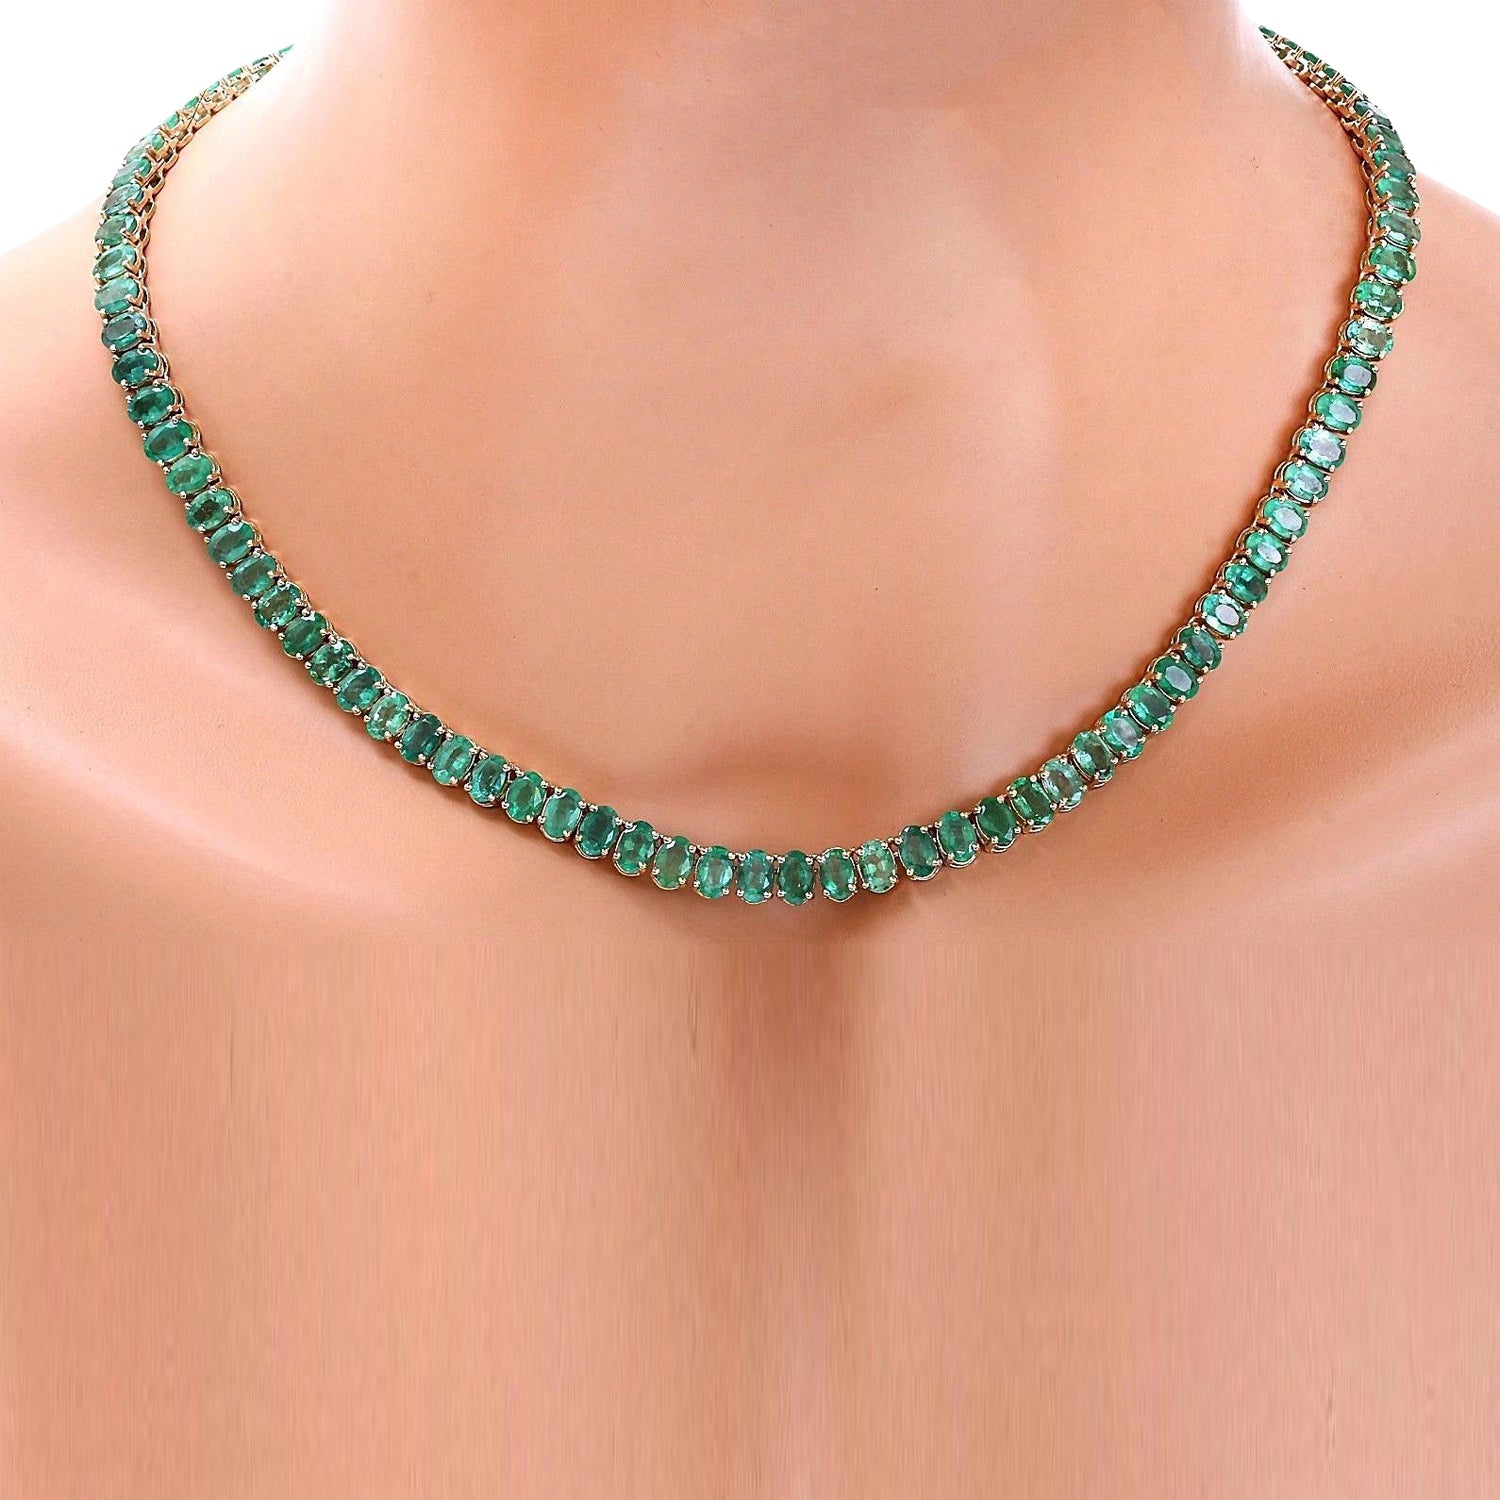 Buy Anigalan Premium Palaka Type Kerala Necklace with Ruby and Emerald  Stones Online at Best Prices in India - JioMart.